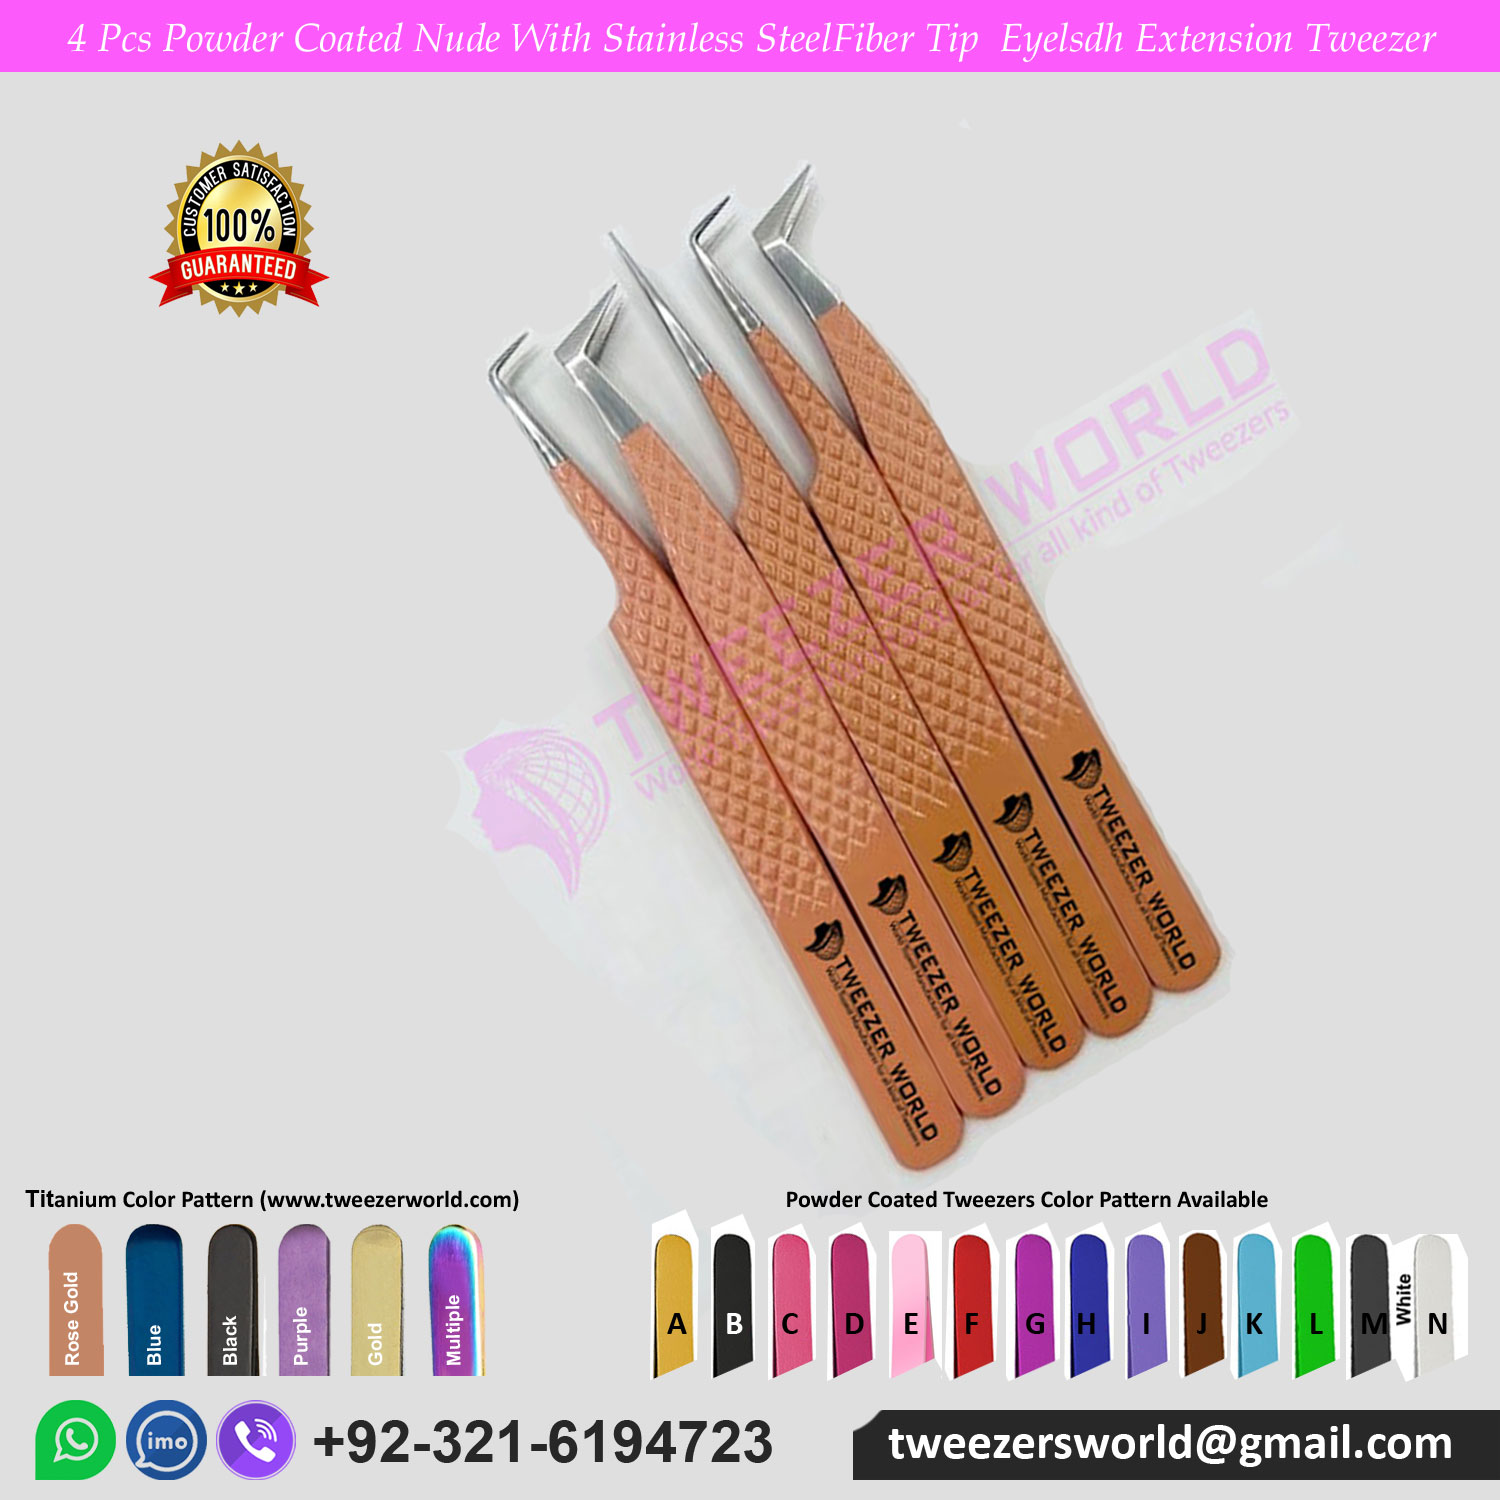 4 Pcs Powder Coated Nude Color With Stainless Steel Fiber Tip Eyelash Extension Tweezer Set for Professionals